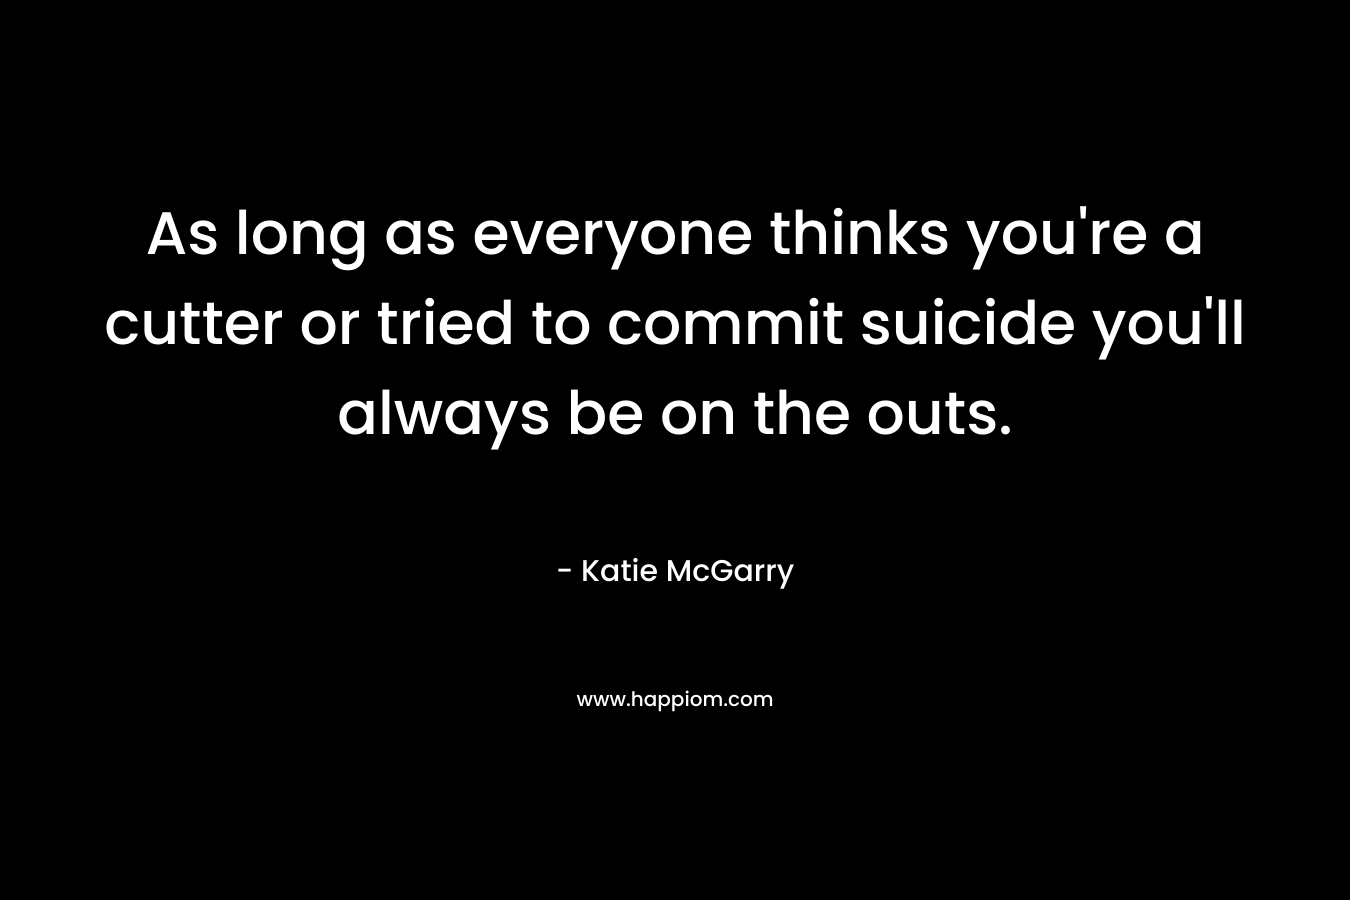 As long as everyone thinks you're a cutter or tried to commit suicide you'll always be on the outs.